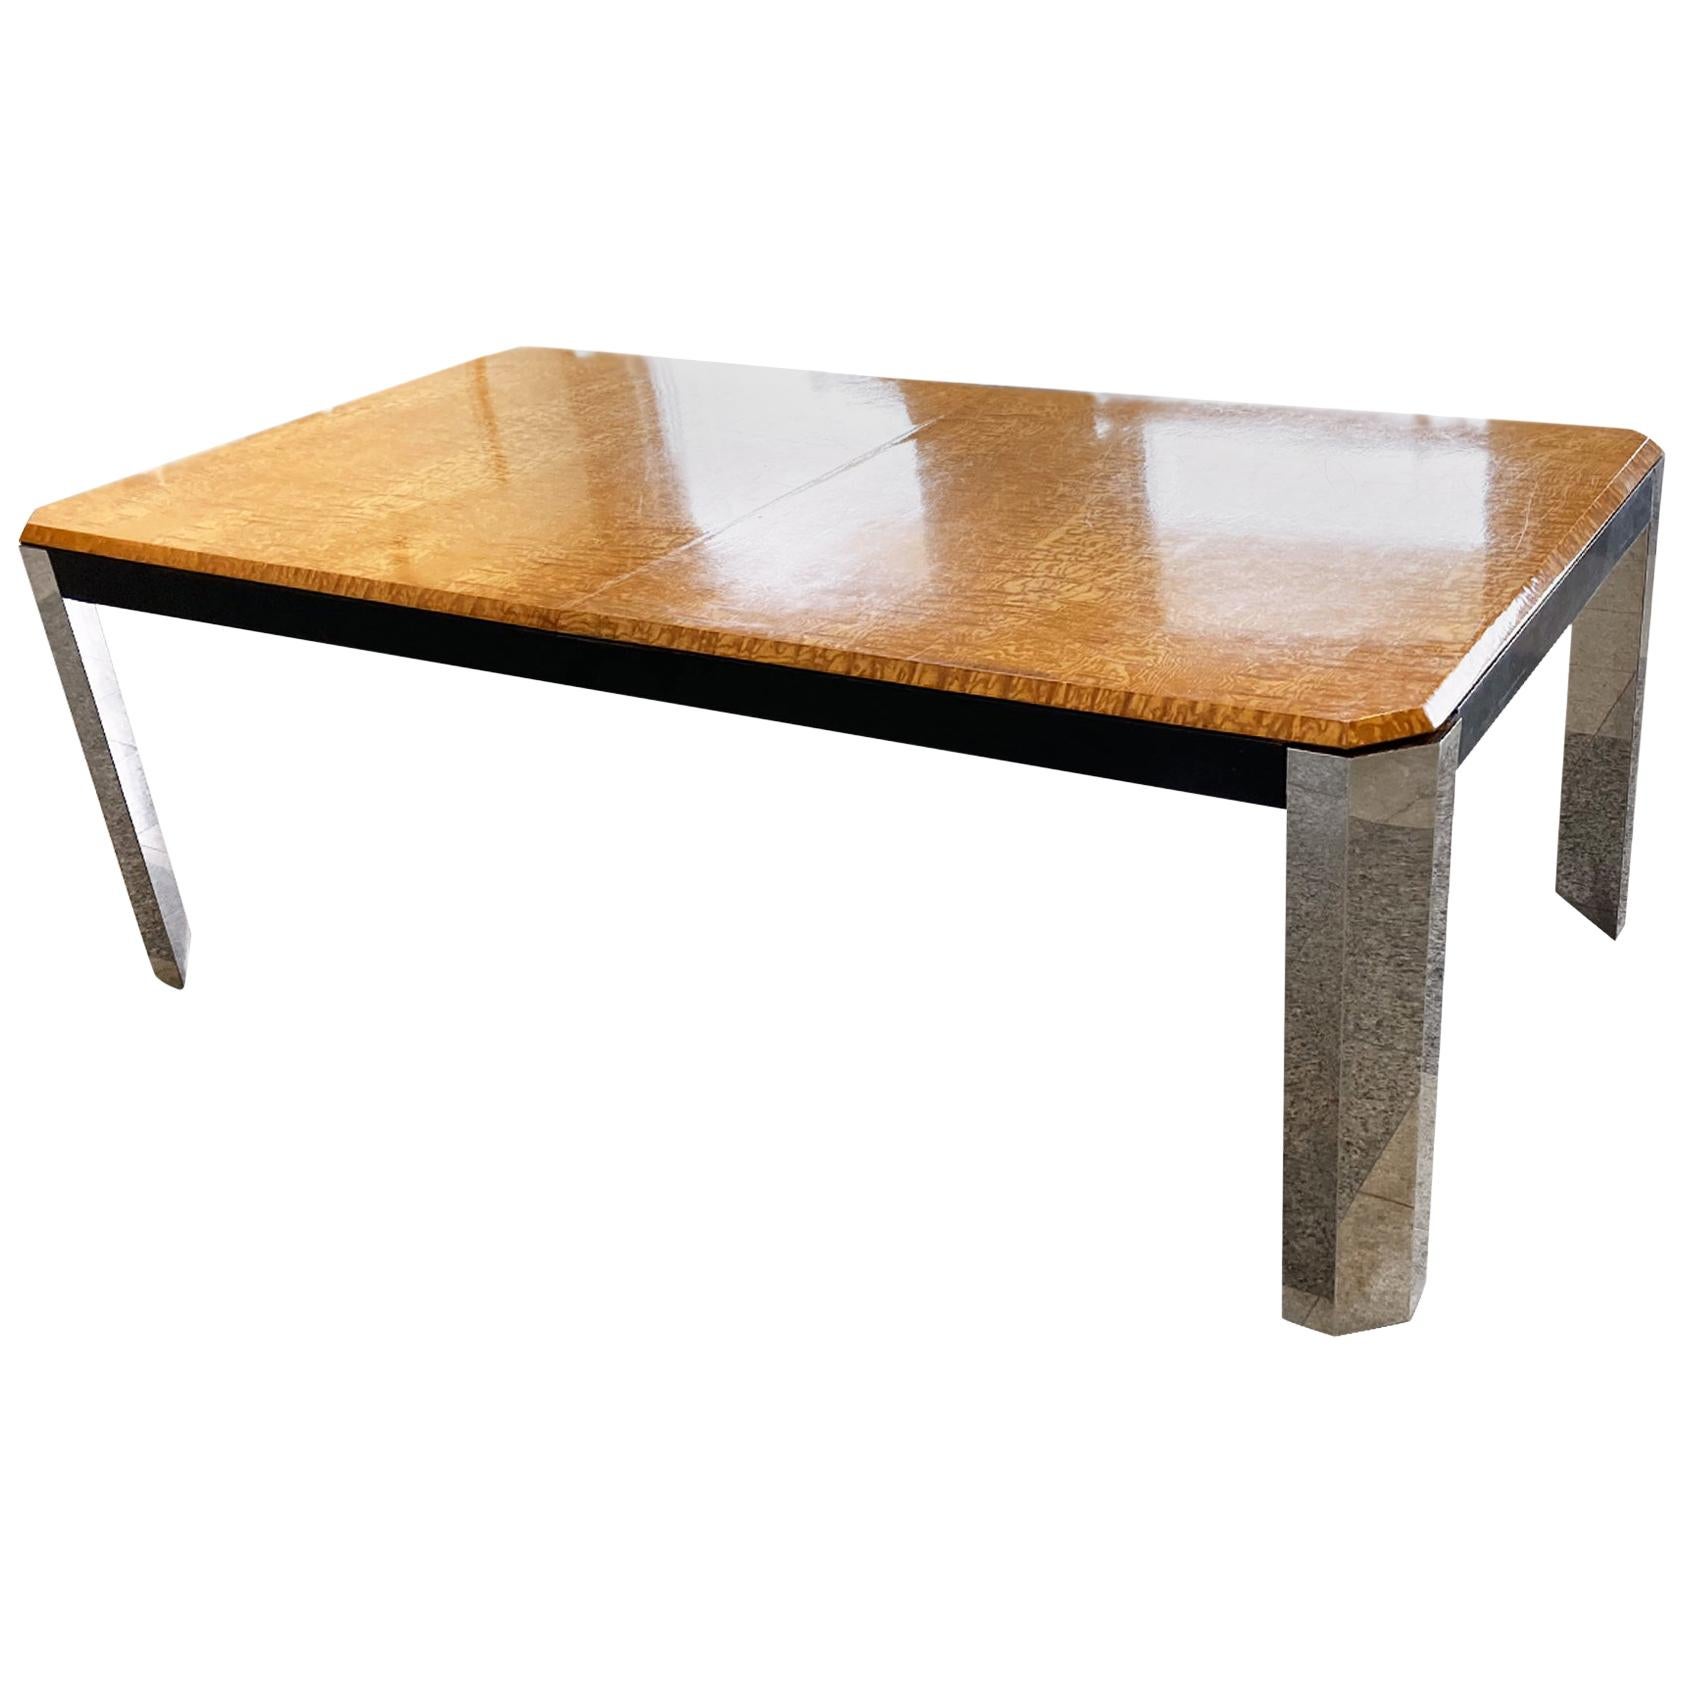 1970s Extendable Dining Table in the style of Milo Baughman